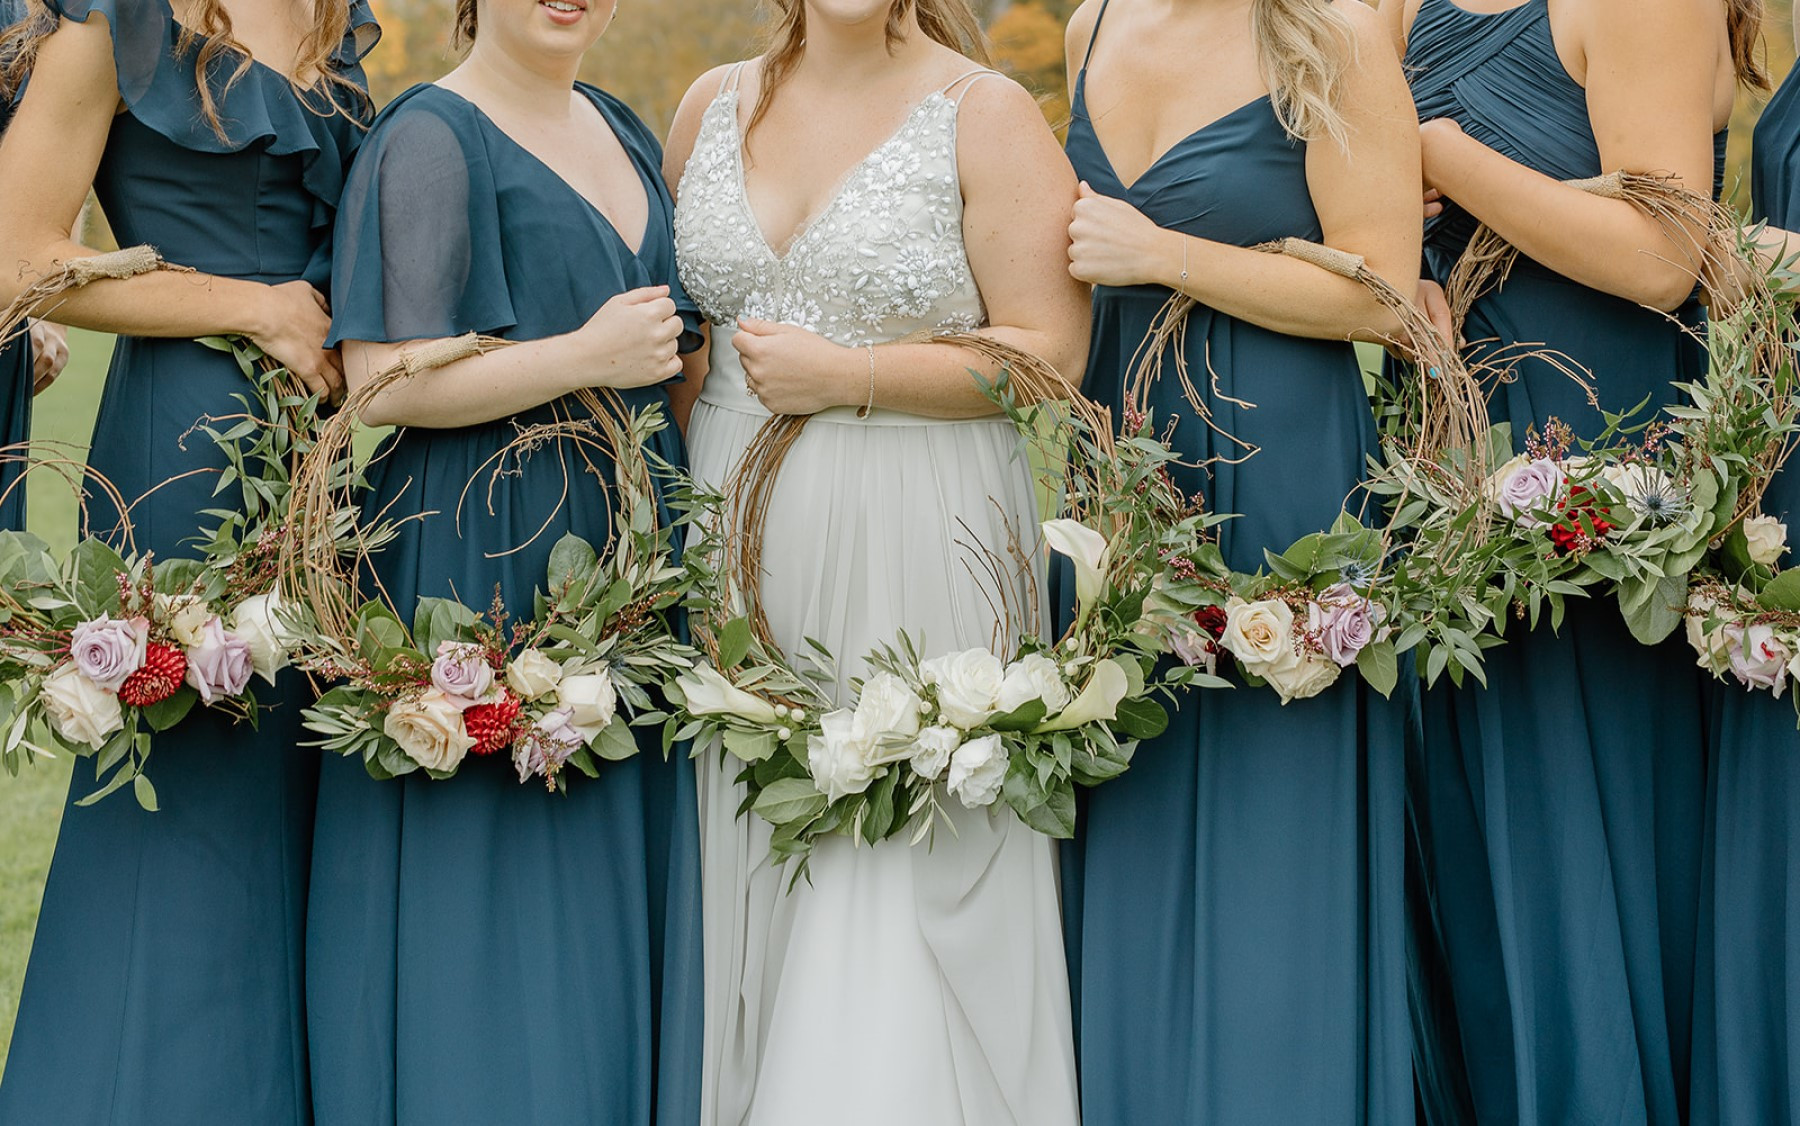 floral bouquet rounds being held by bride and four bridesmaids in blue dresses